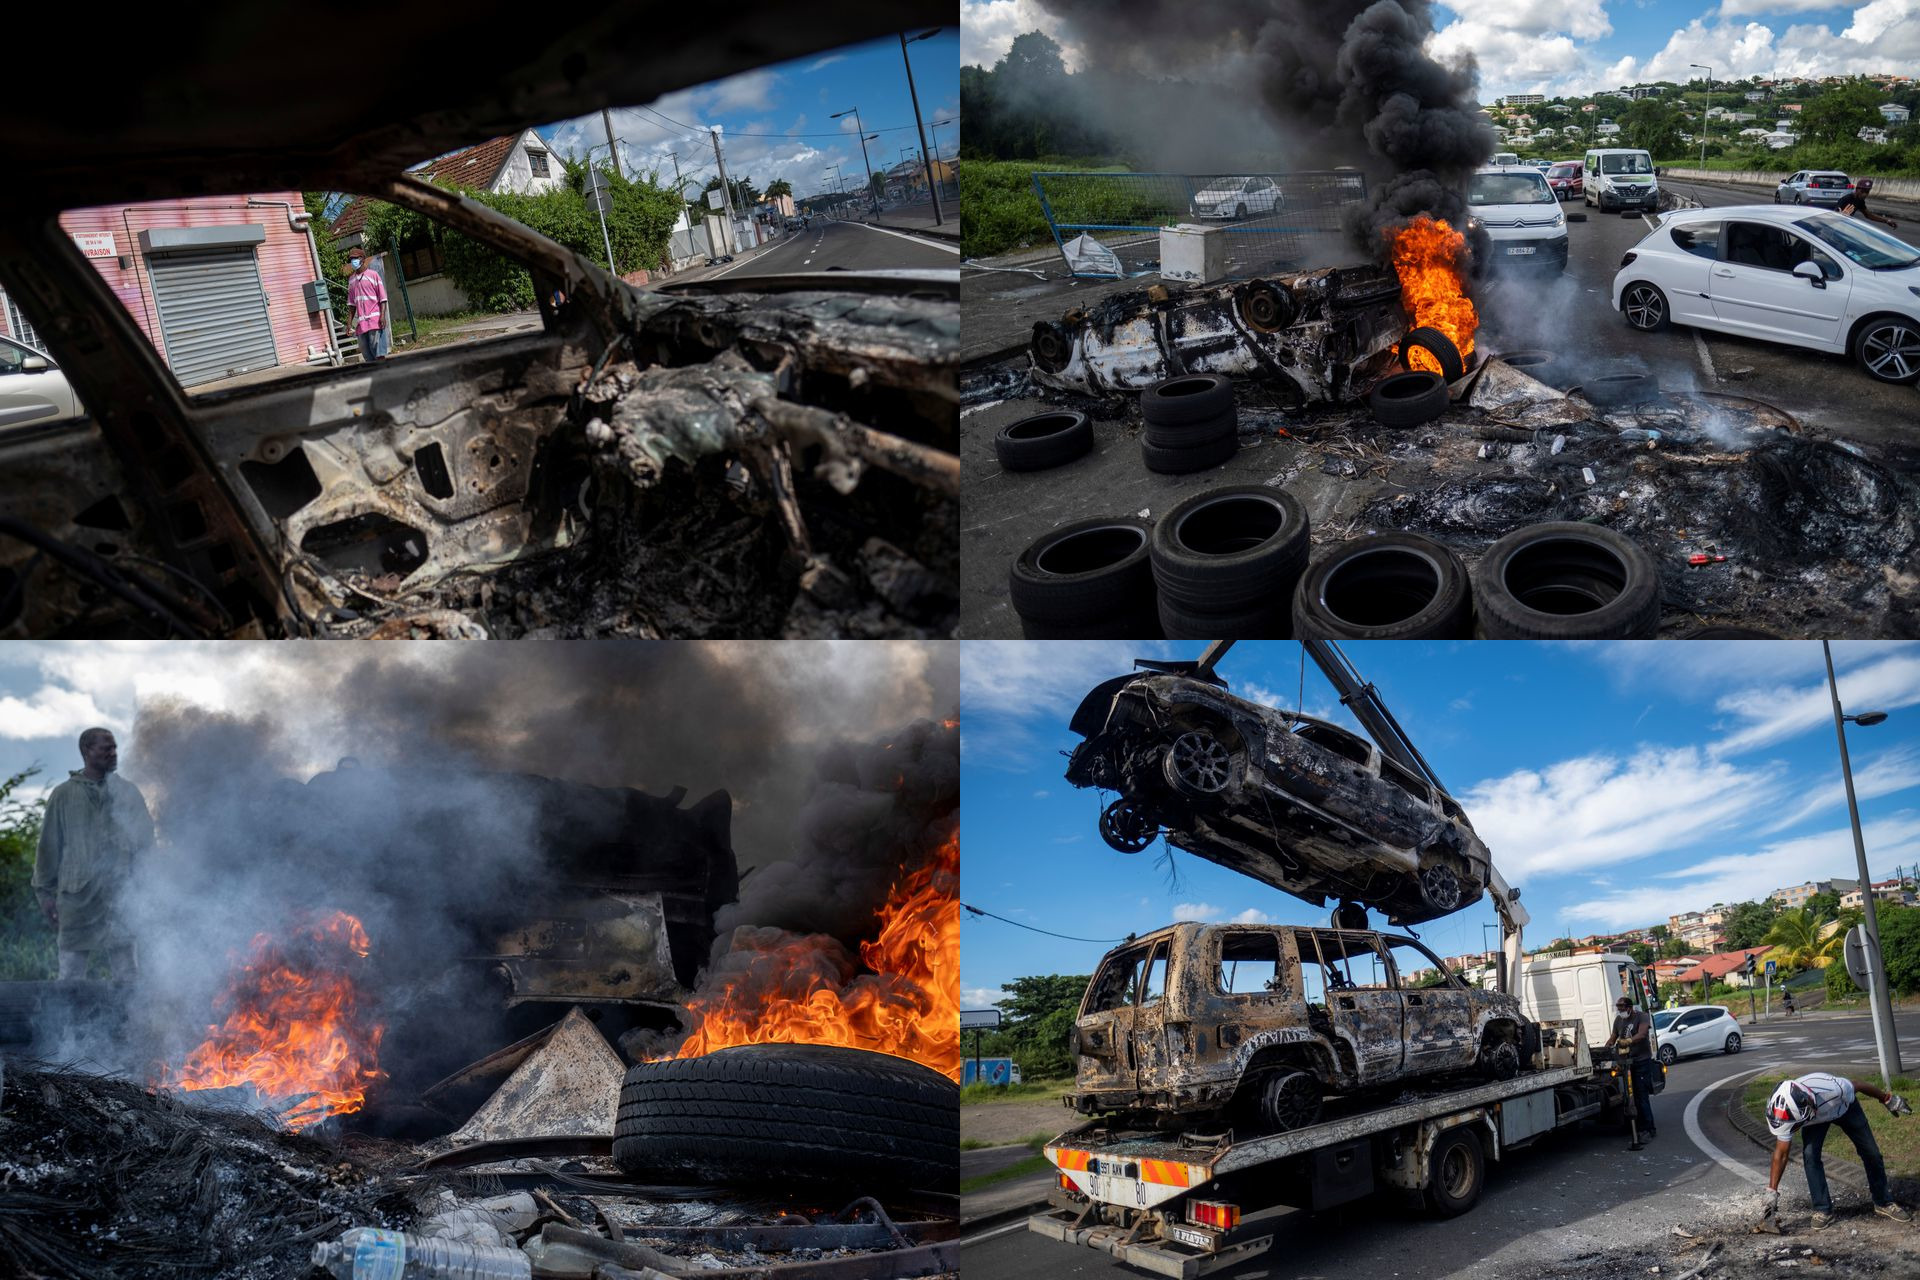 France's Martinique Territory Imposes Curfew After Looting, Lawlessness